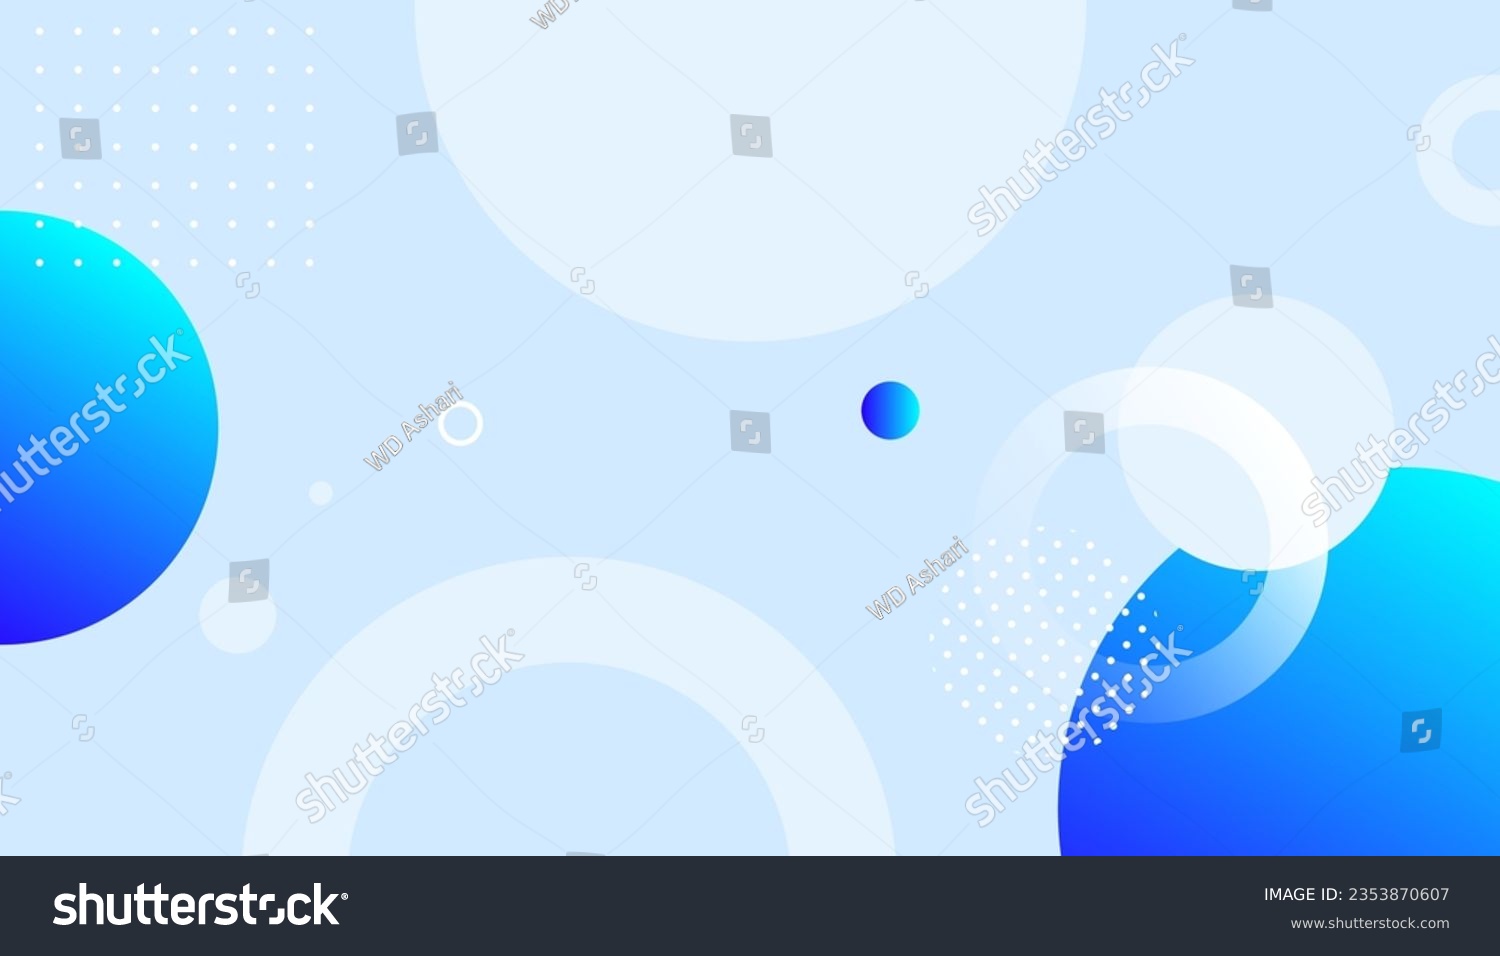 SVG of Abstract modern dynamic blue geometric background. vector design concept. Decorative web layout or poster, banner
 svg